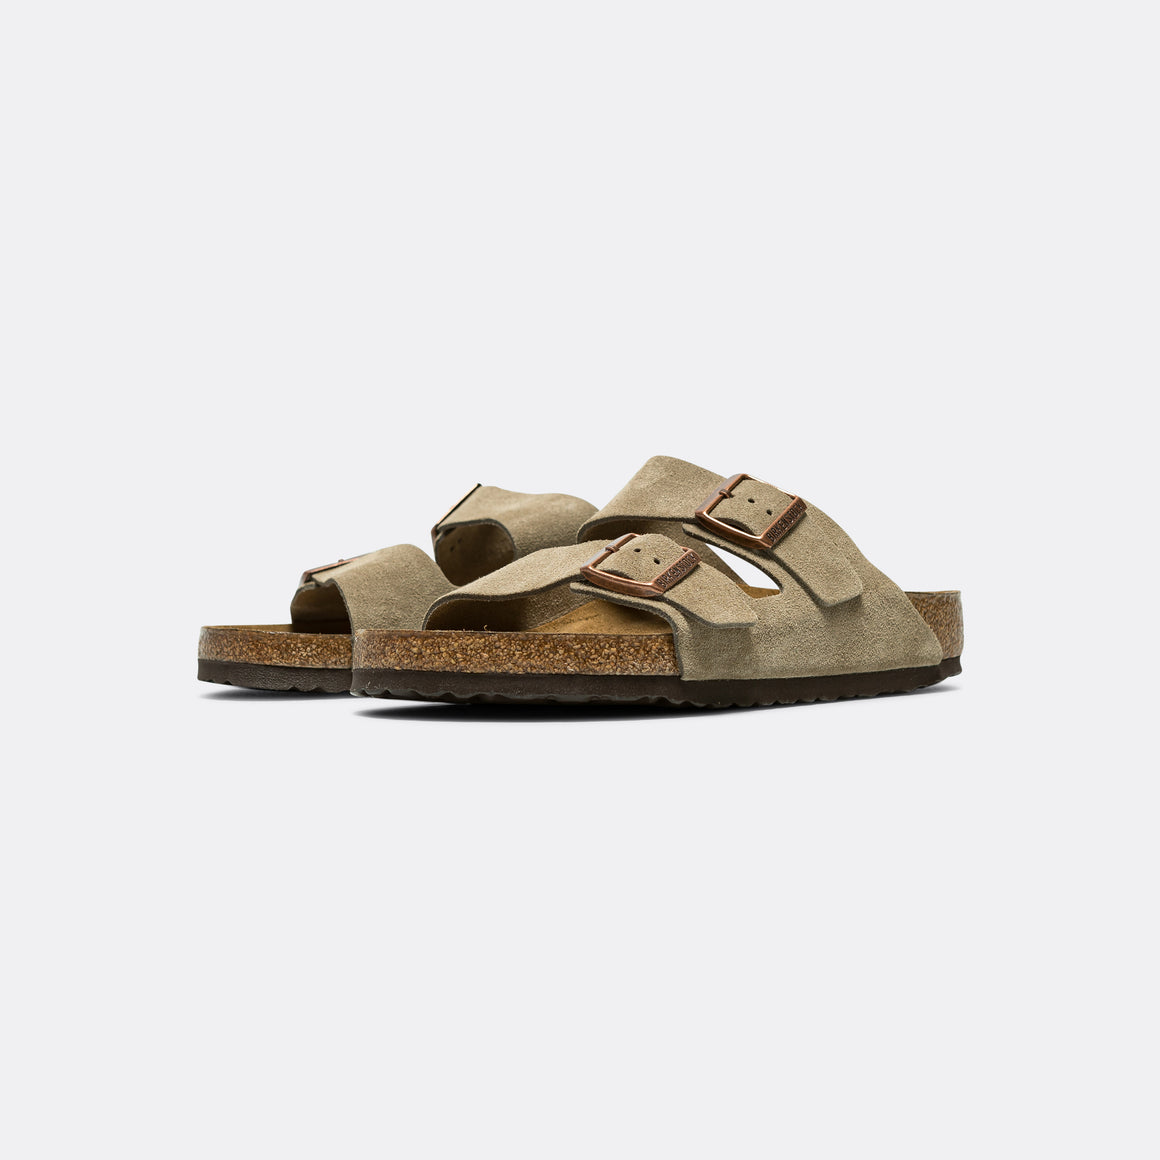 Birkenstock - Arizona SFB - Taupe Suede Leather - UP THERE